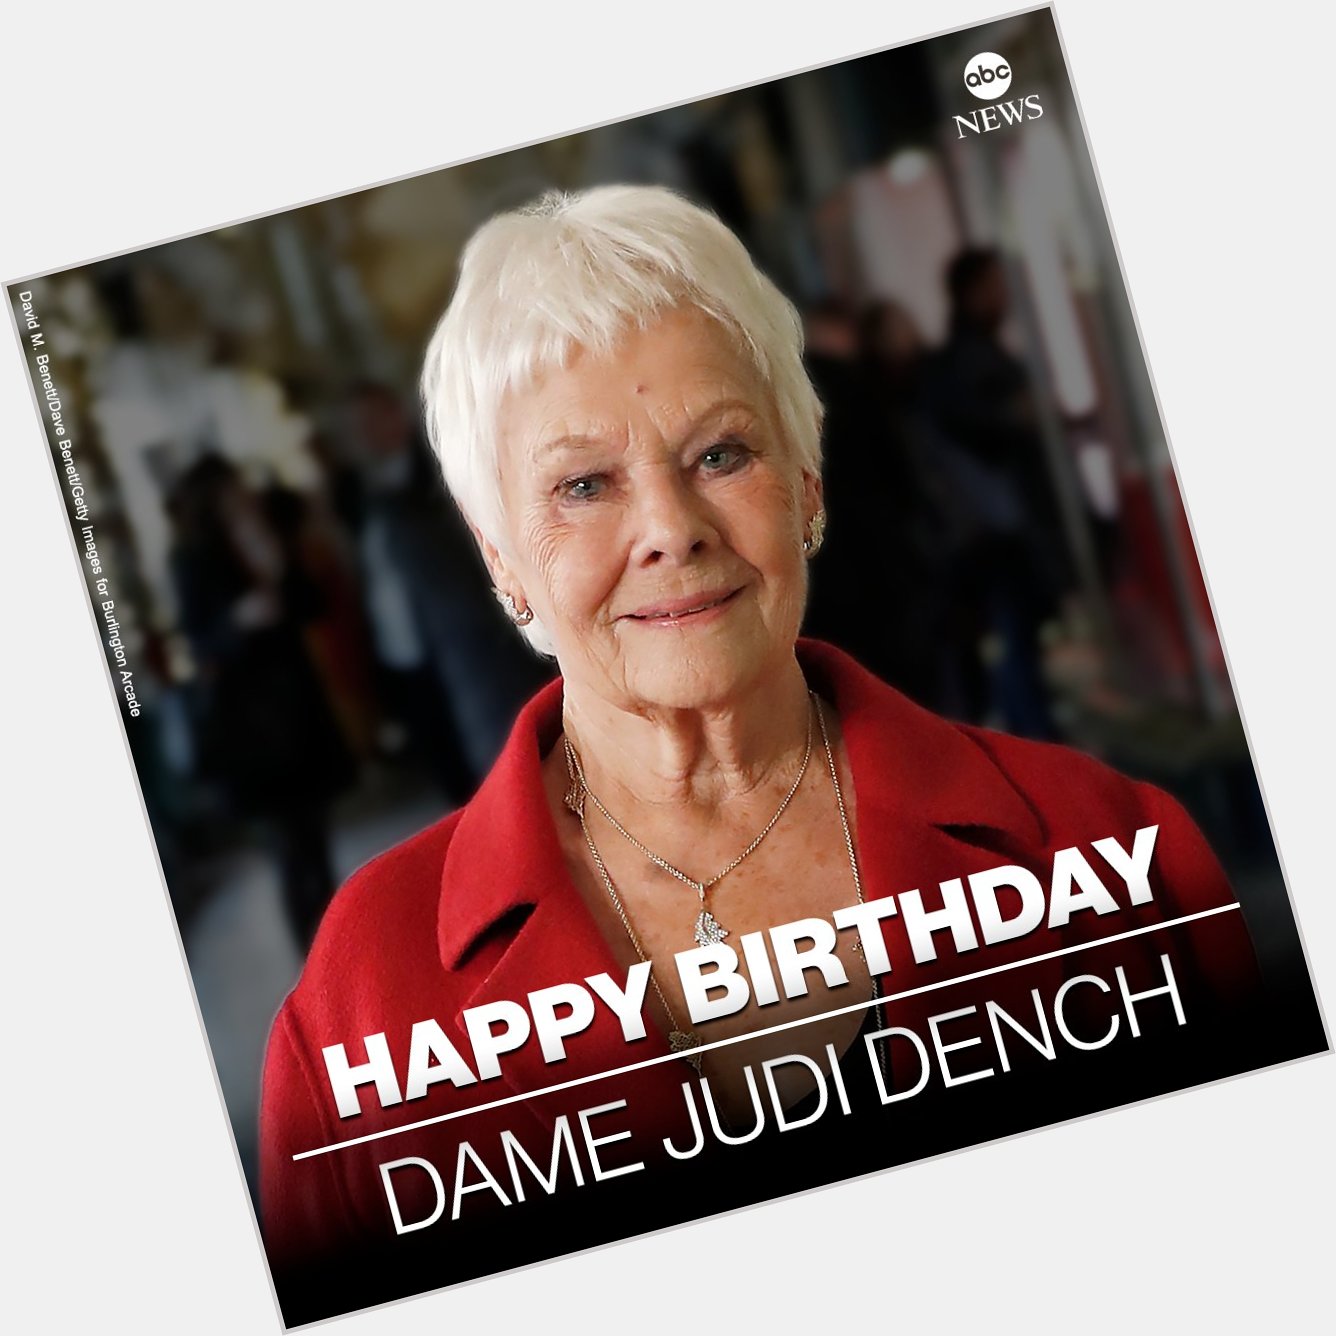 HAPPY BIRTHDAY: Actor Dame Judi Dench is 87 today.  